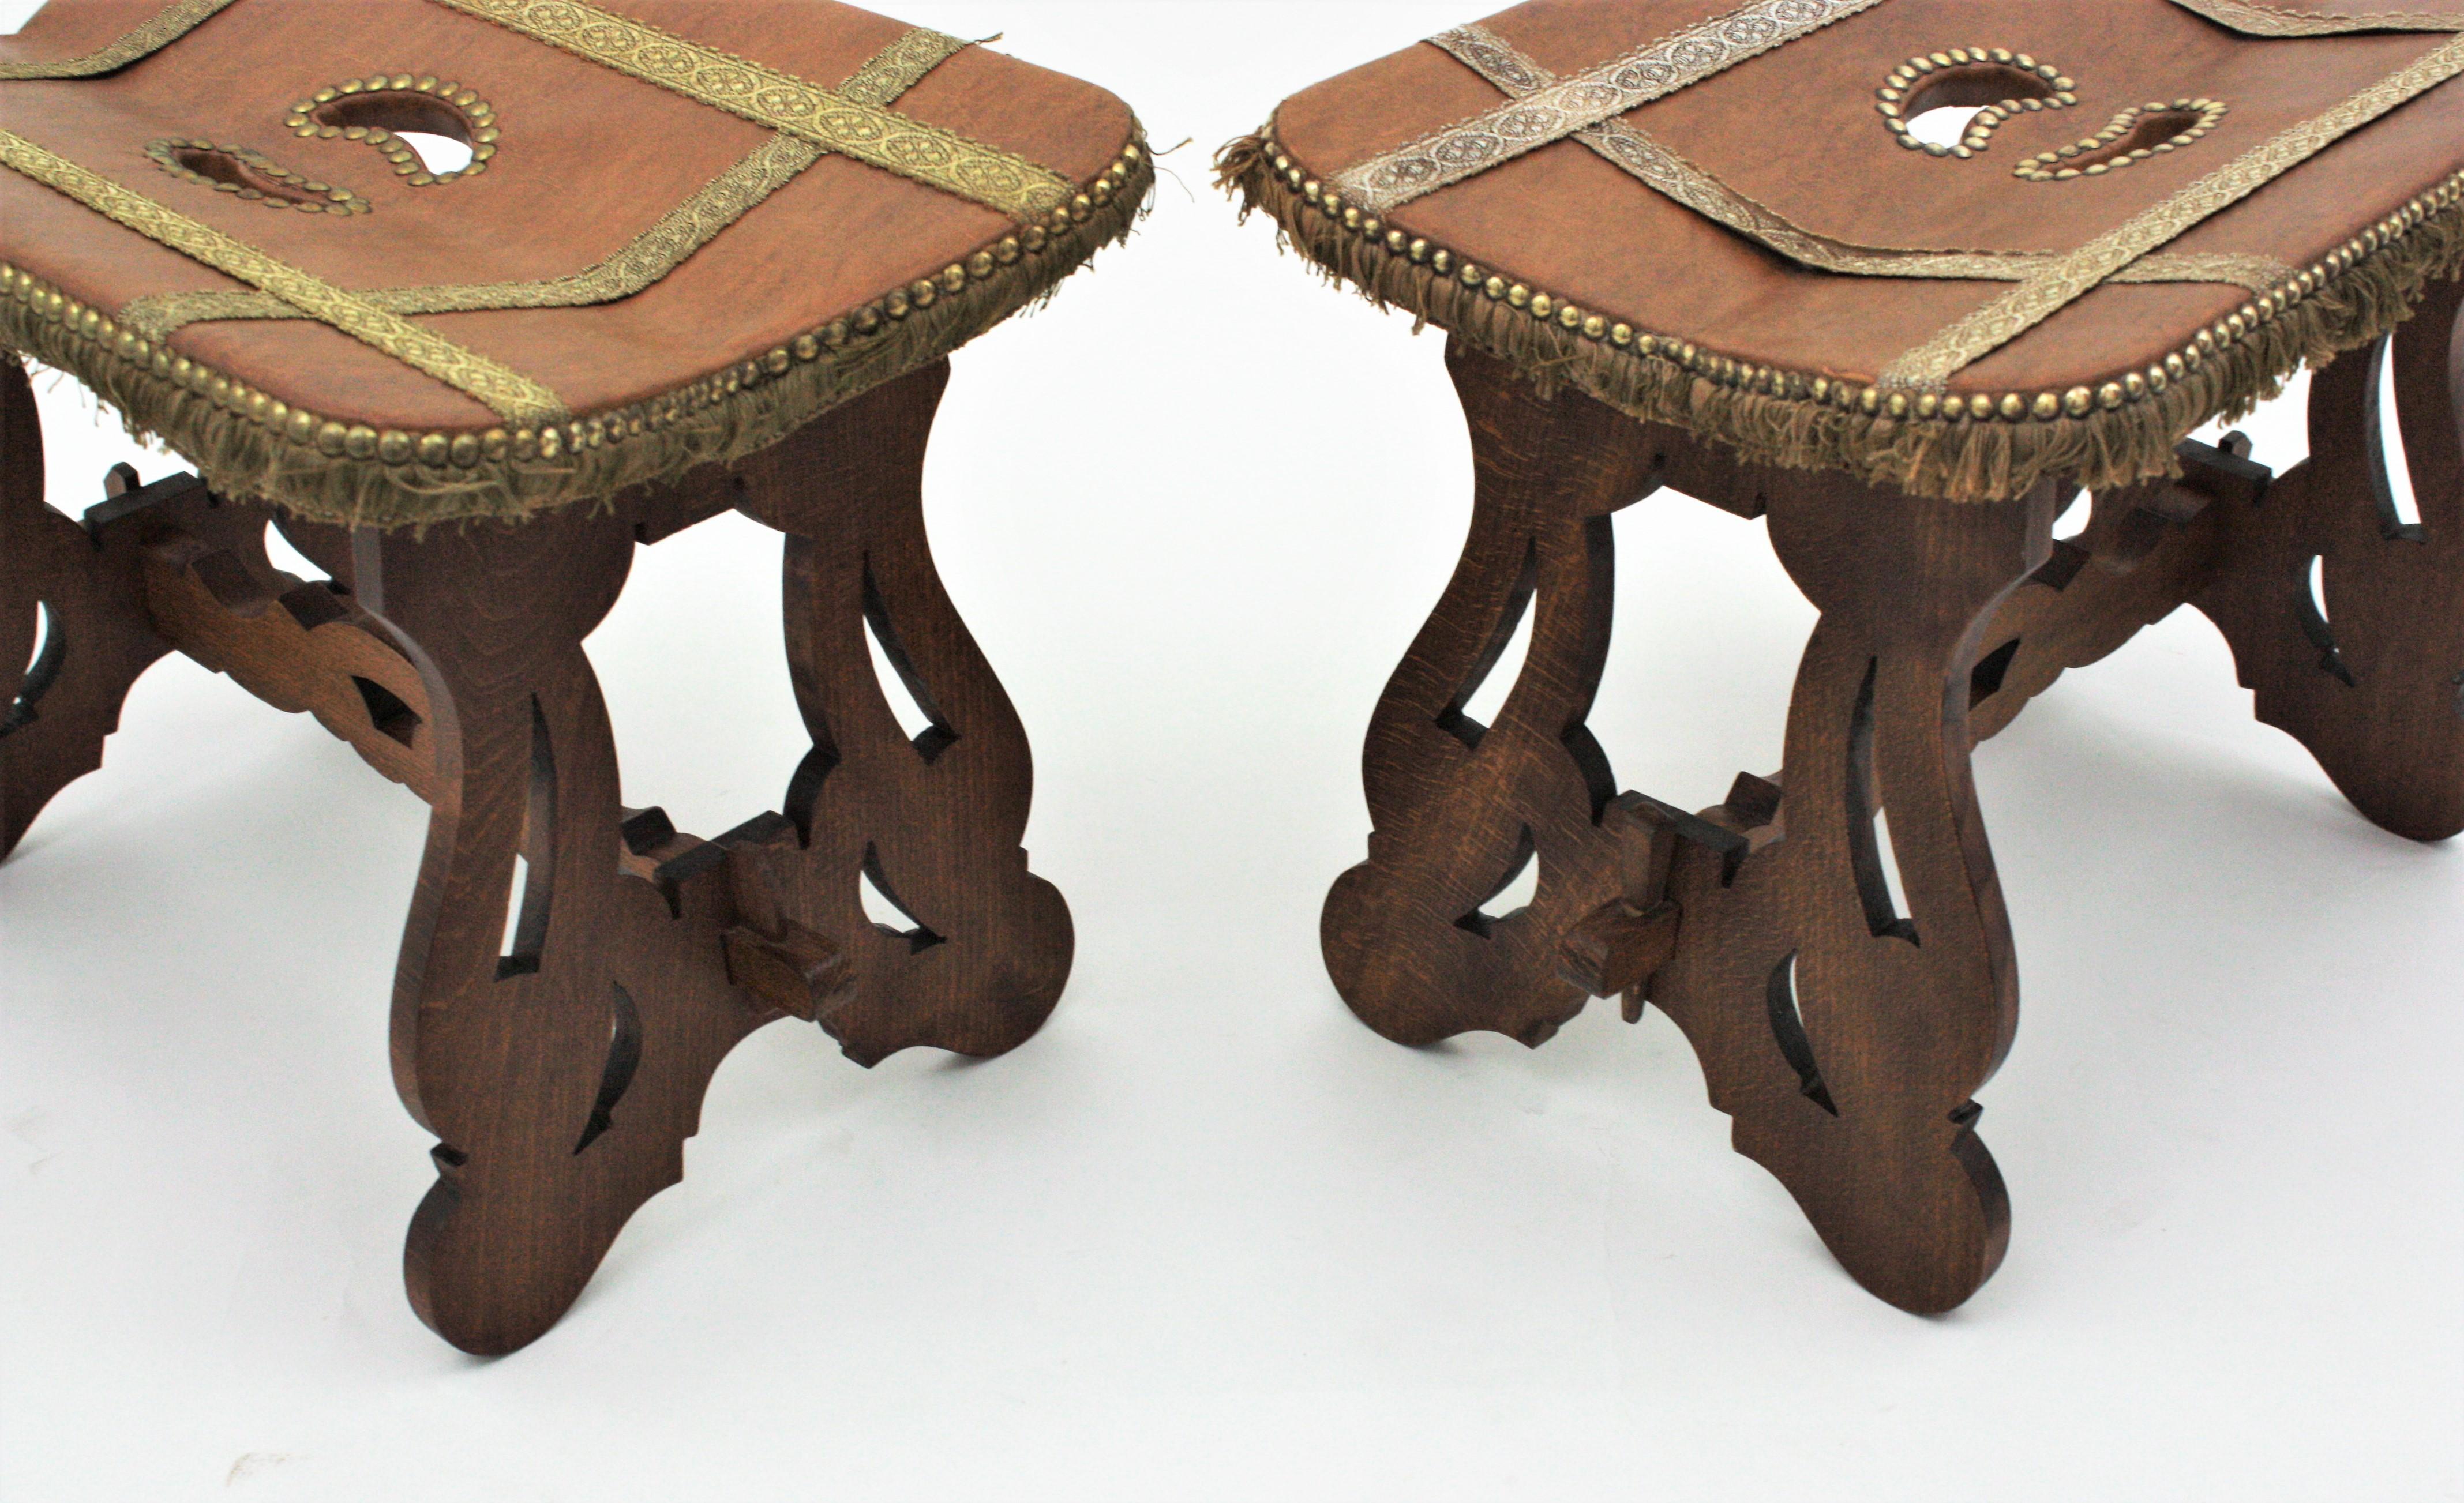 20th Century Pair of Spanish Stools in Wood and Leatherette, 1950s For Sale